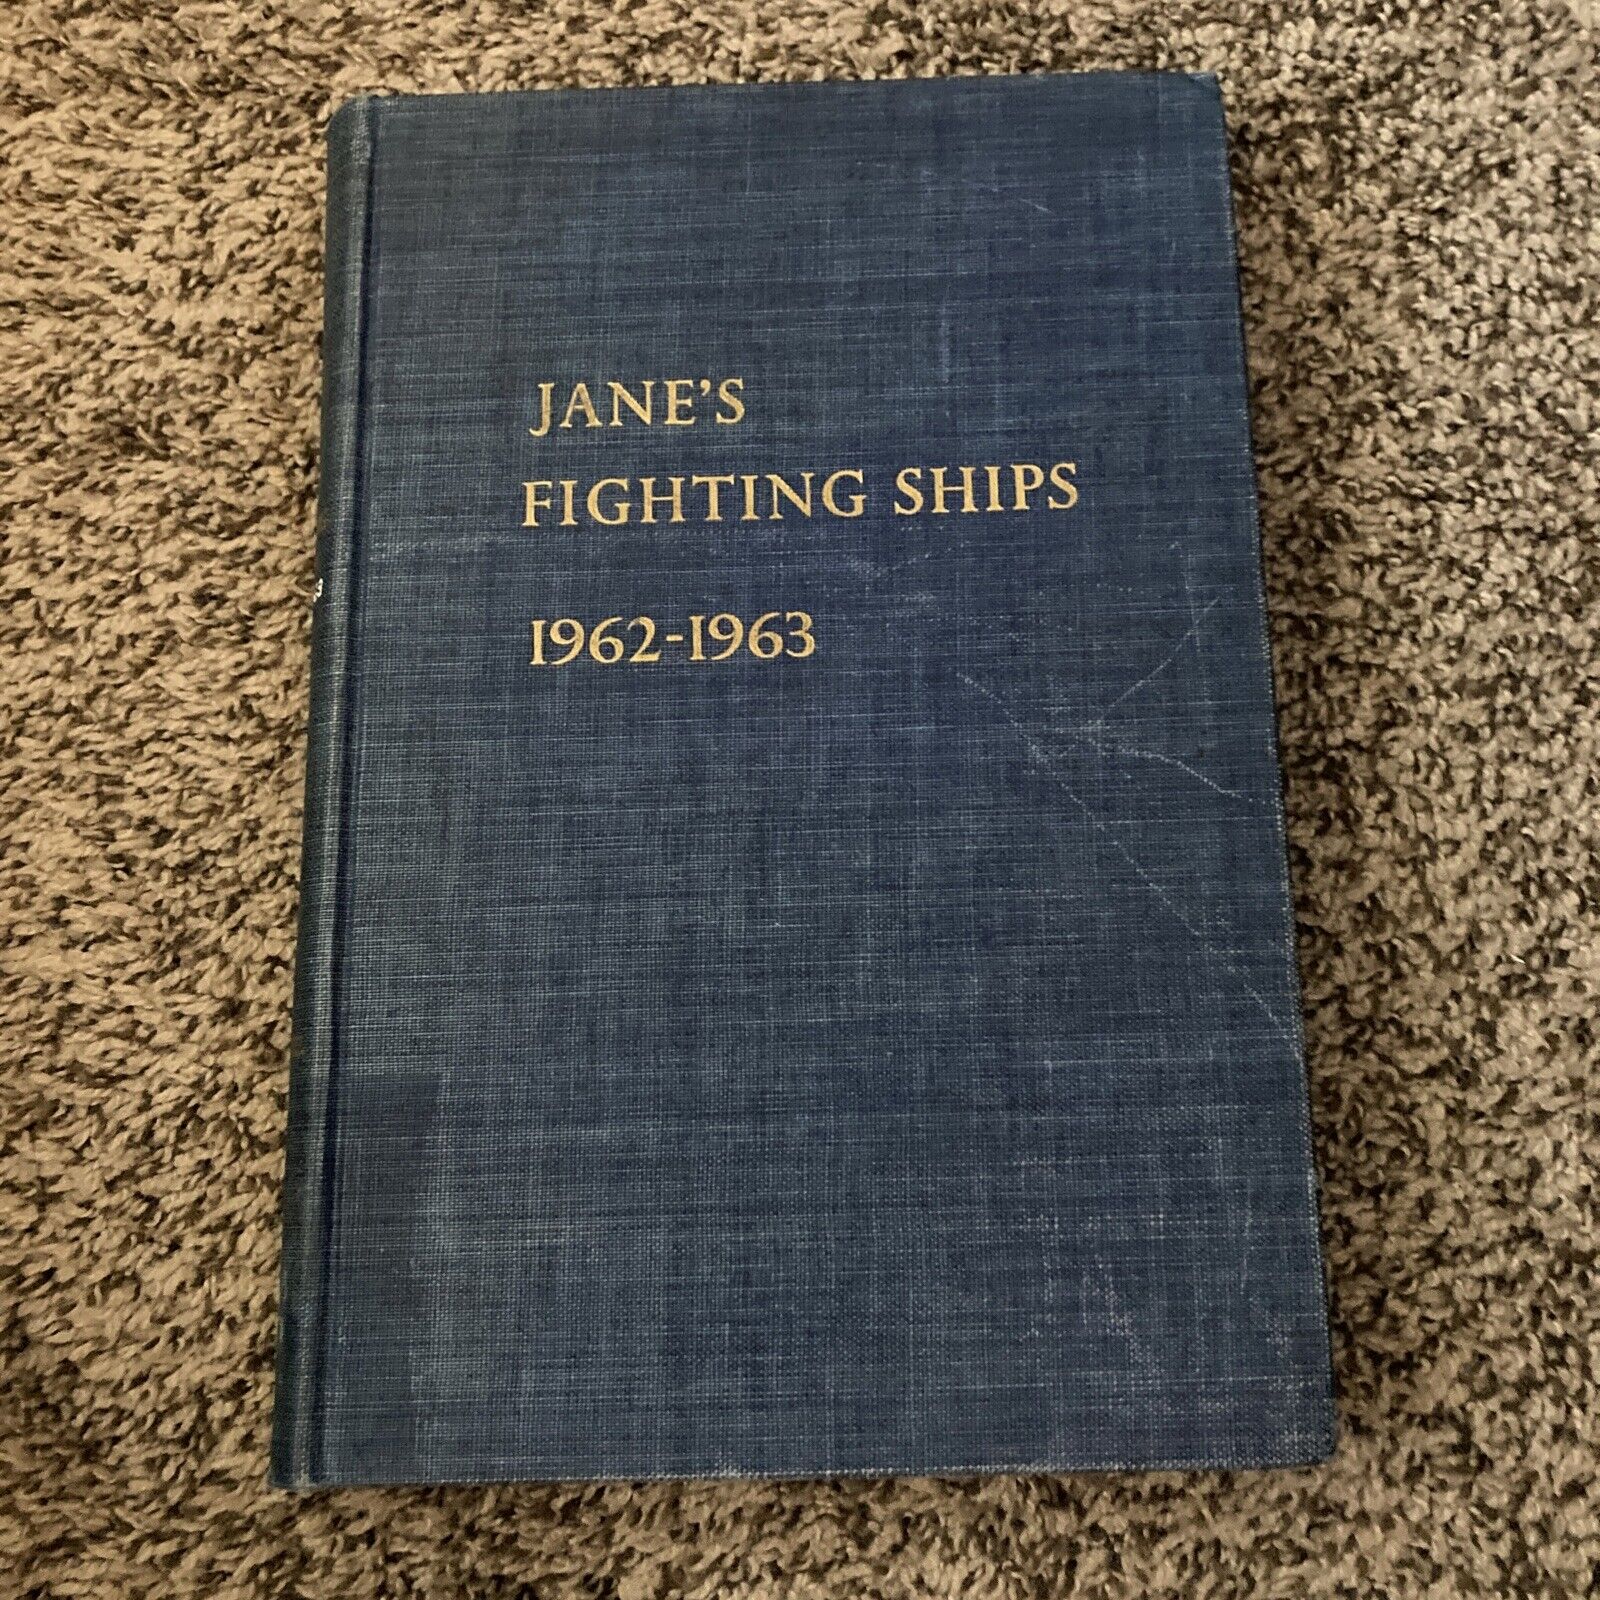 Jane's Fighting Ships Naval Reference Book Military 1962-63